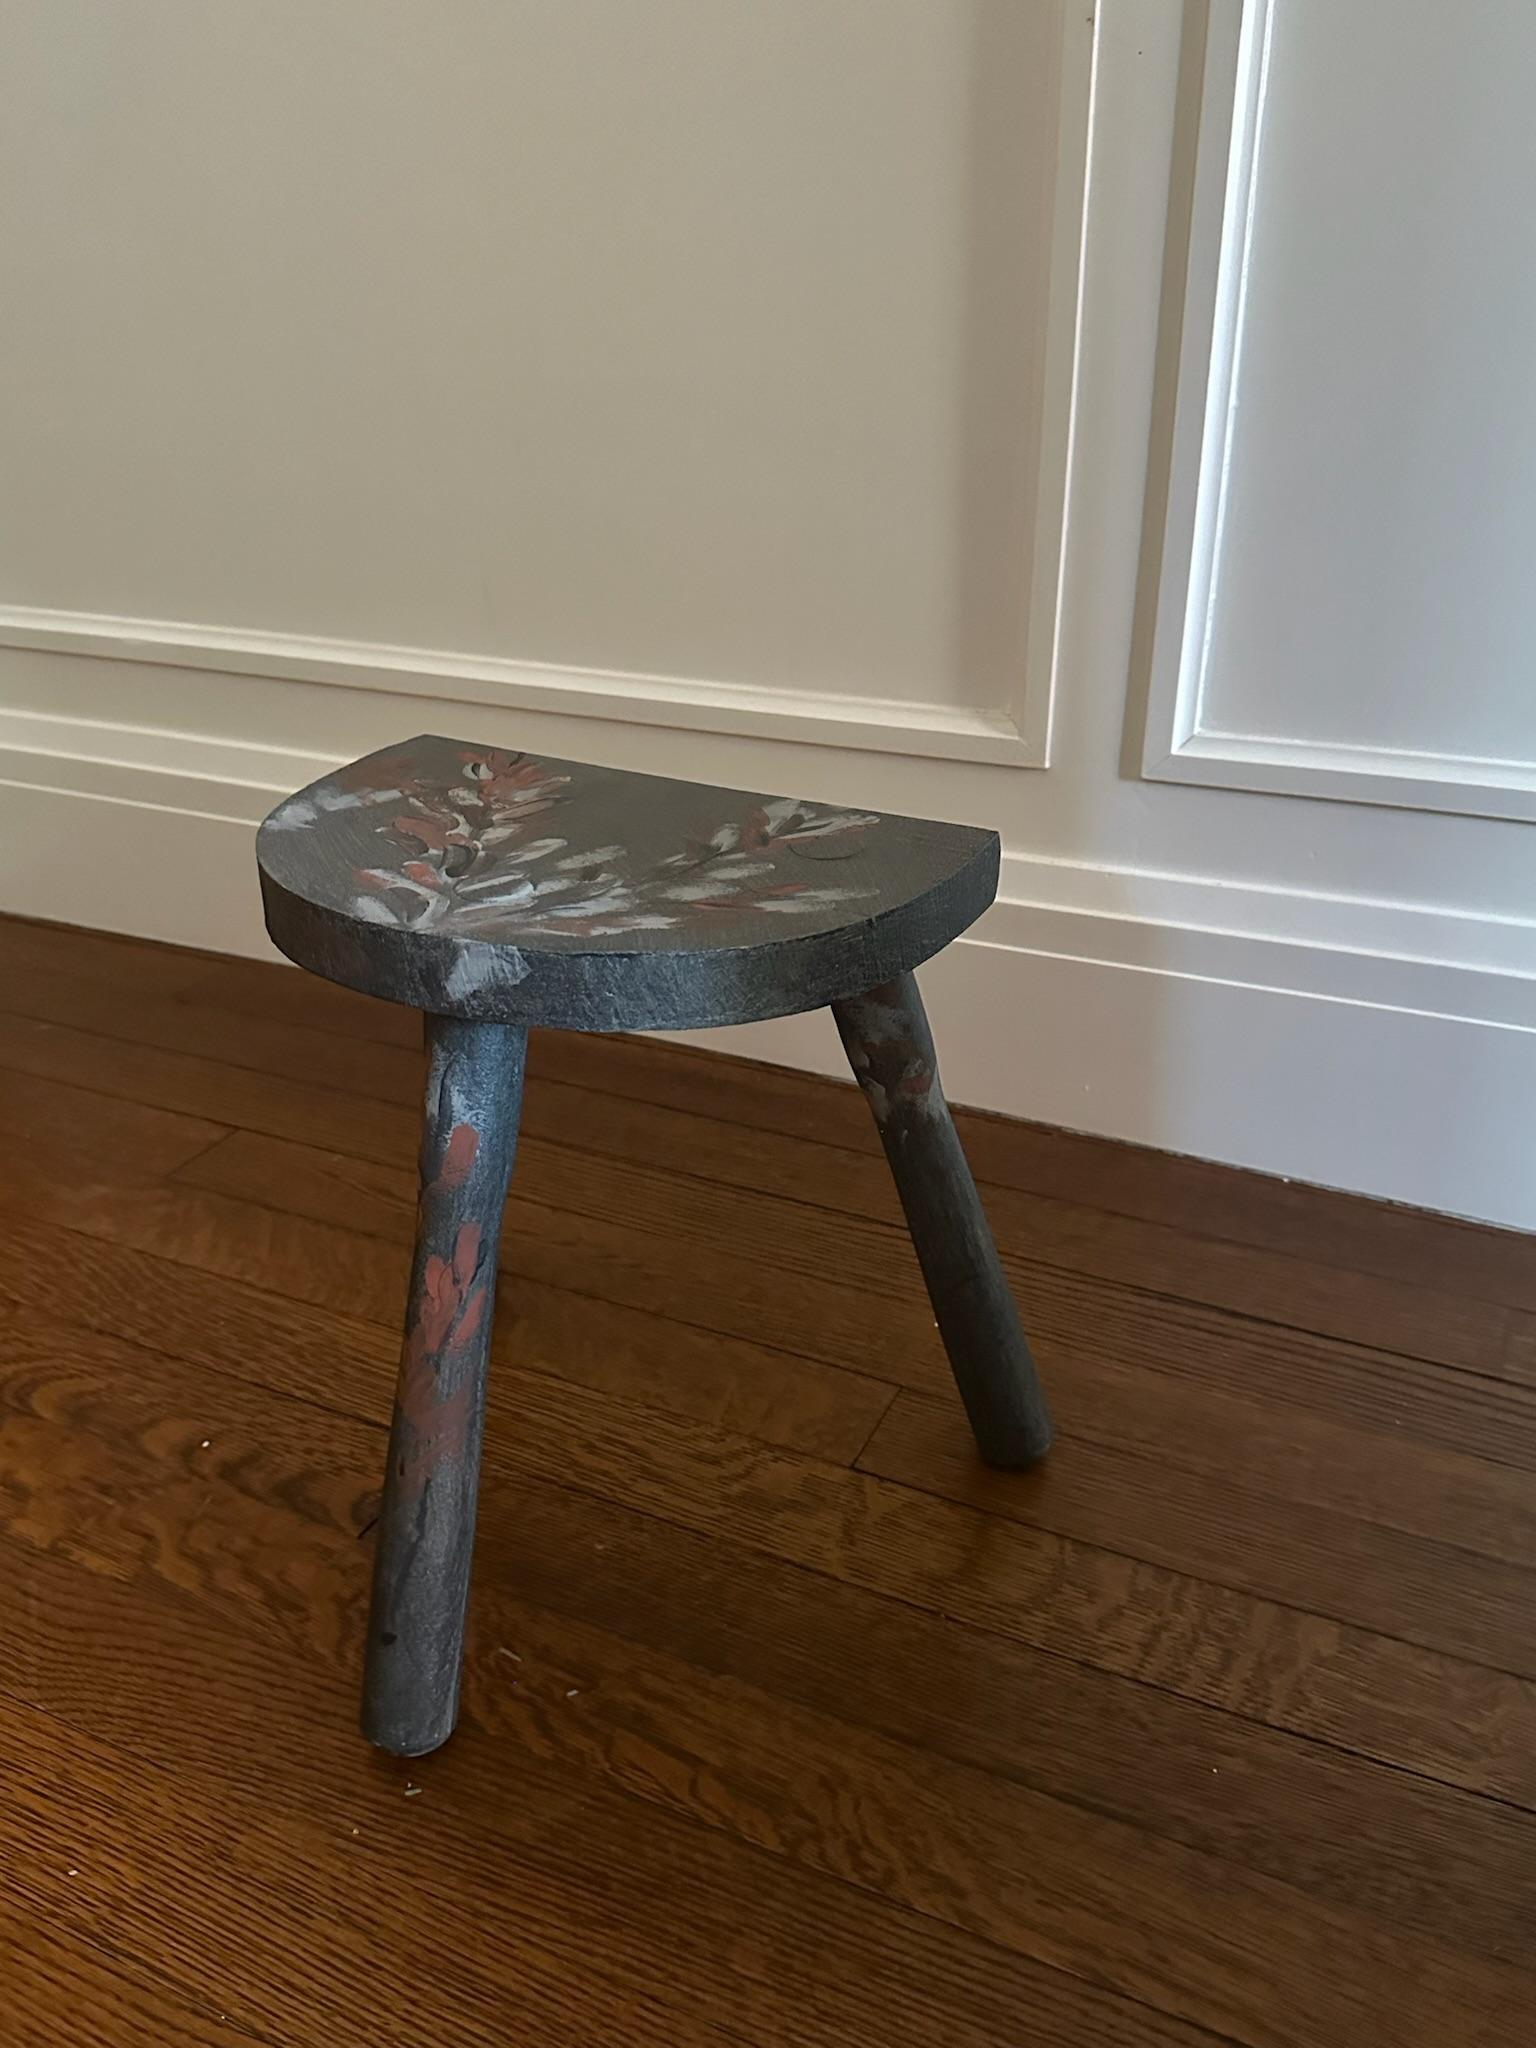 Custom hand-painted small wooden milking stool. This is a one-of-a-kind piece handpainted by James Mobley in Los Angeles, CA.